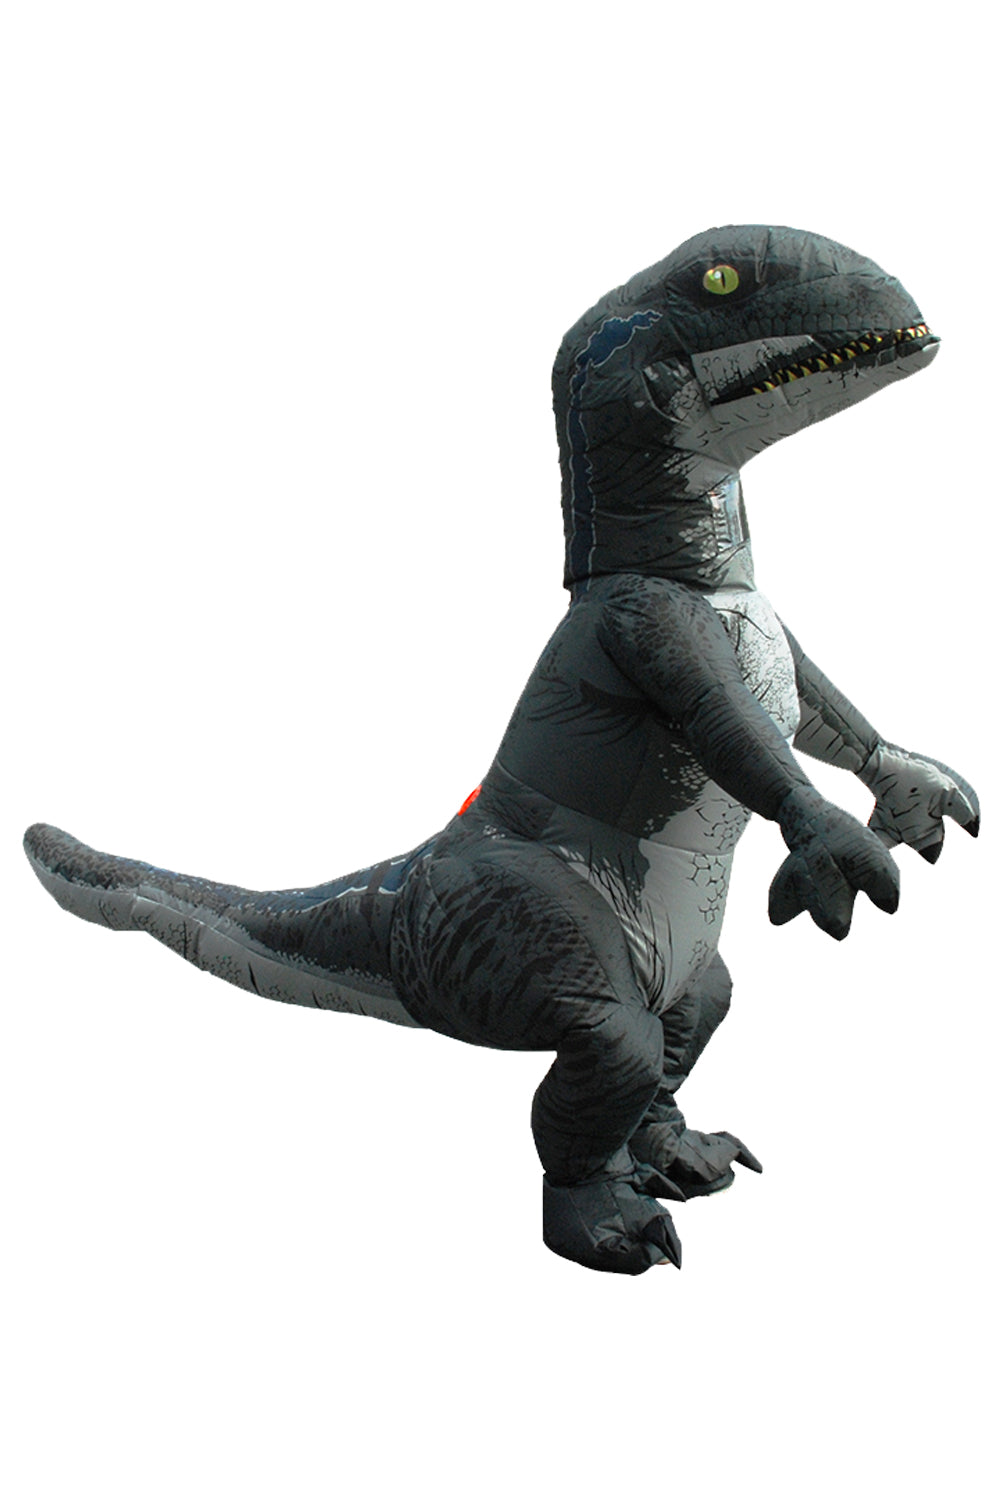 Jurassic World 2 Dinosaure Gonflable Combinaison Adulte T-Rex Cosplay Costume